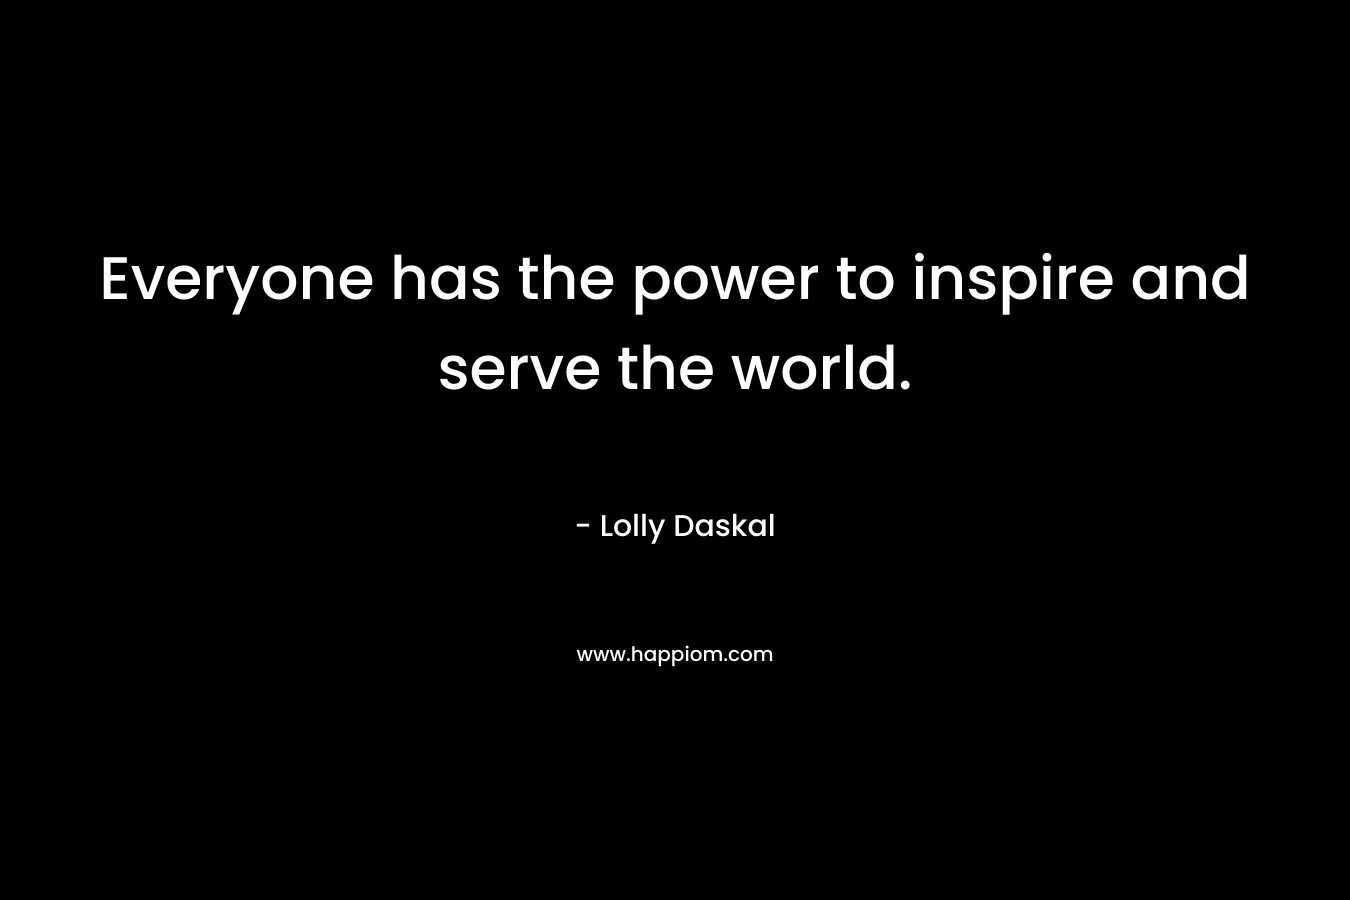 Everyone has the power to inspire and serve the world.